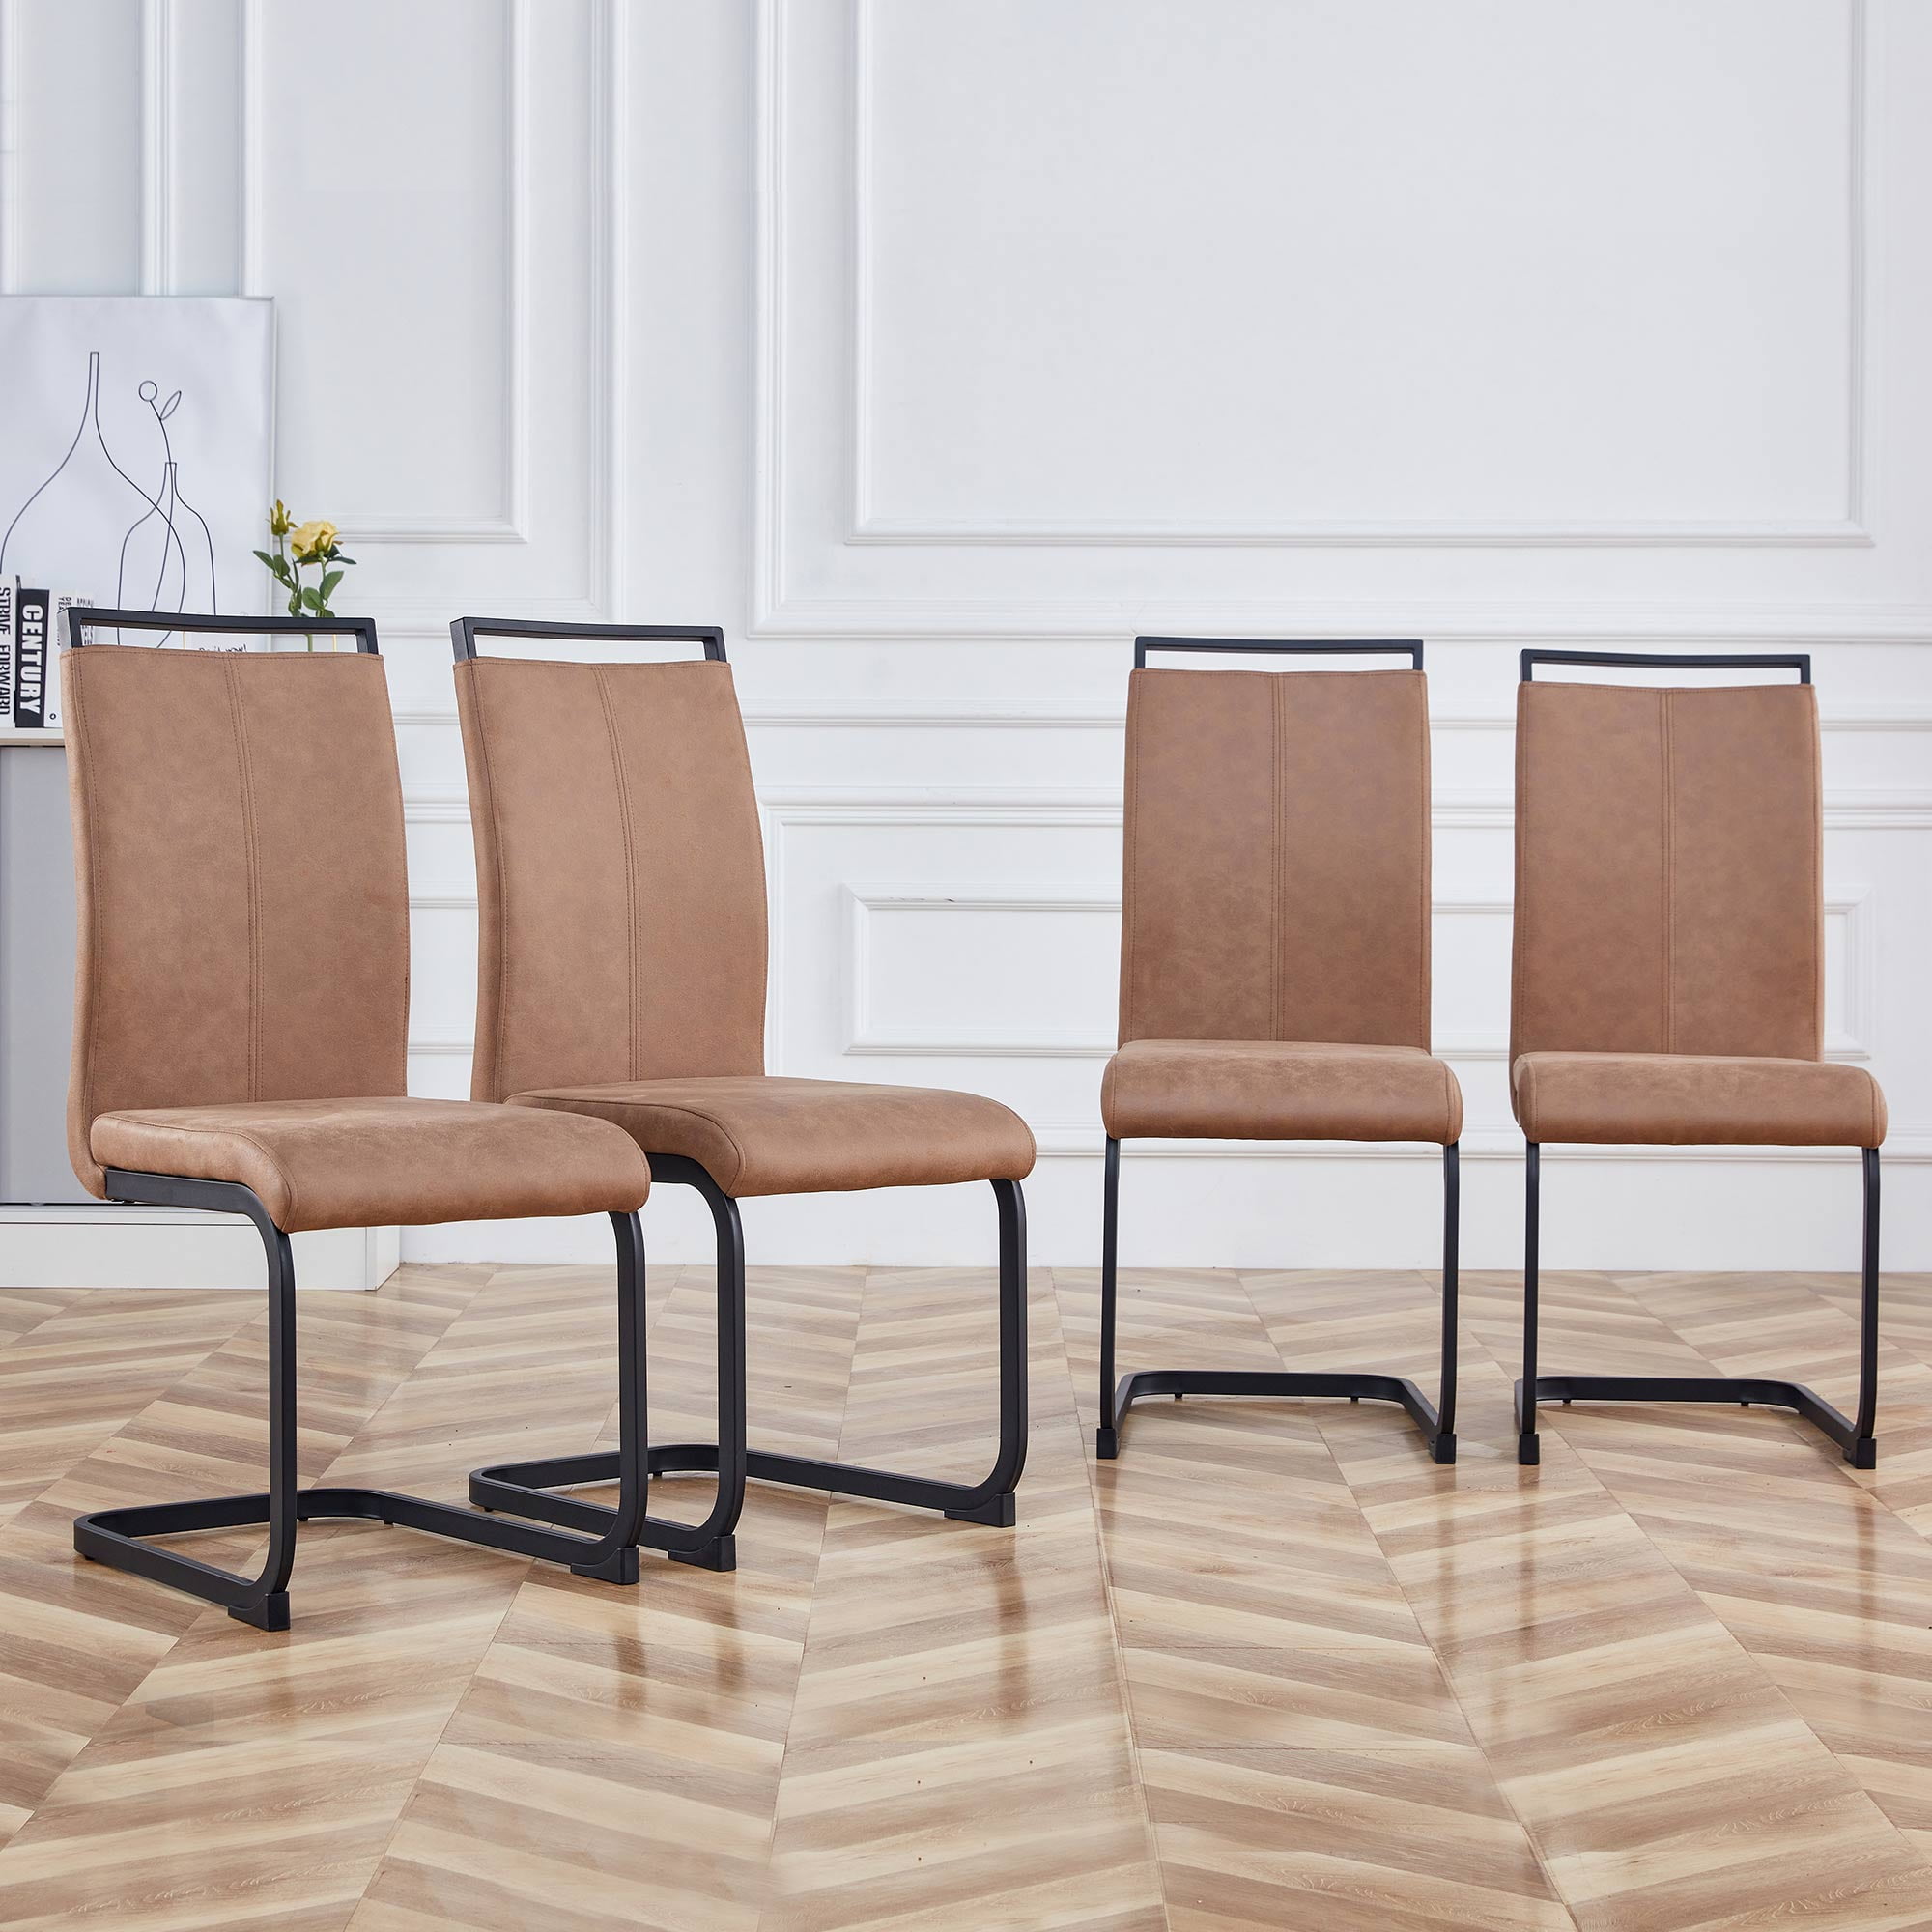 Set of 4 Upholstered Dining Chairs, Modern Faux Leather Kitchen Chairs ...